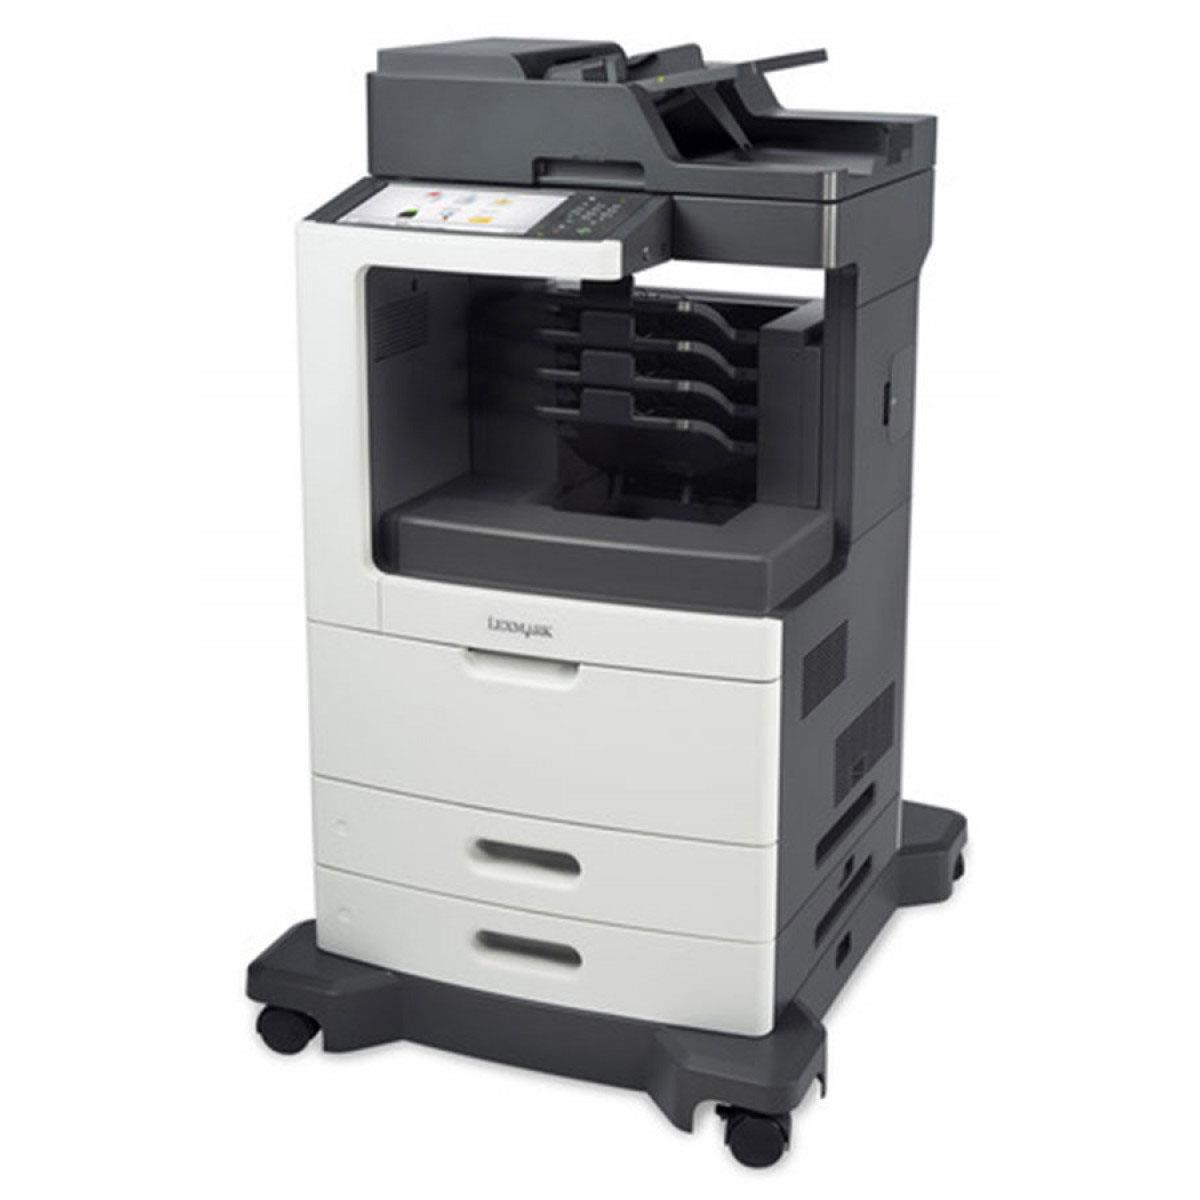 

Lexmark MX812dme B&W Laser MFP with 4-Bin Mailbox, 70 ppm, 1200 Pages Standard